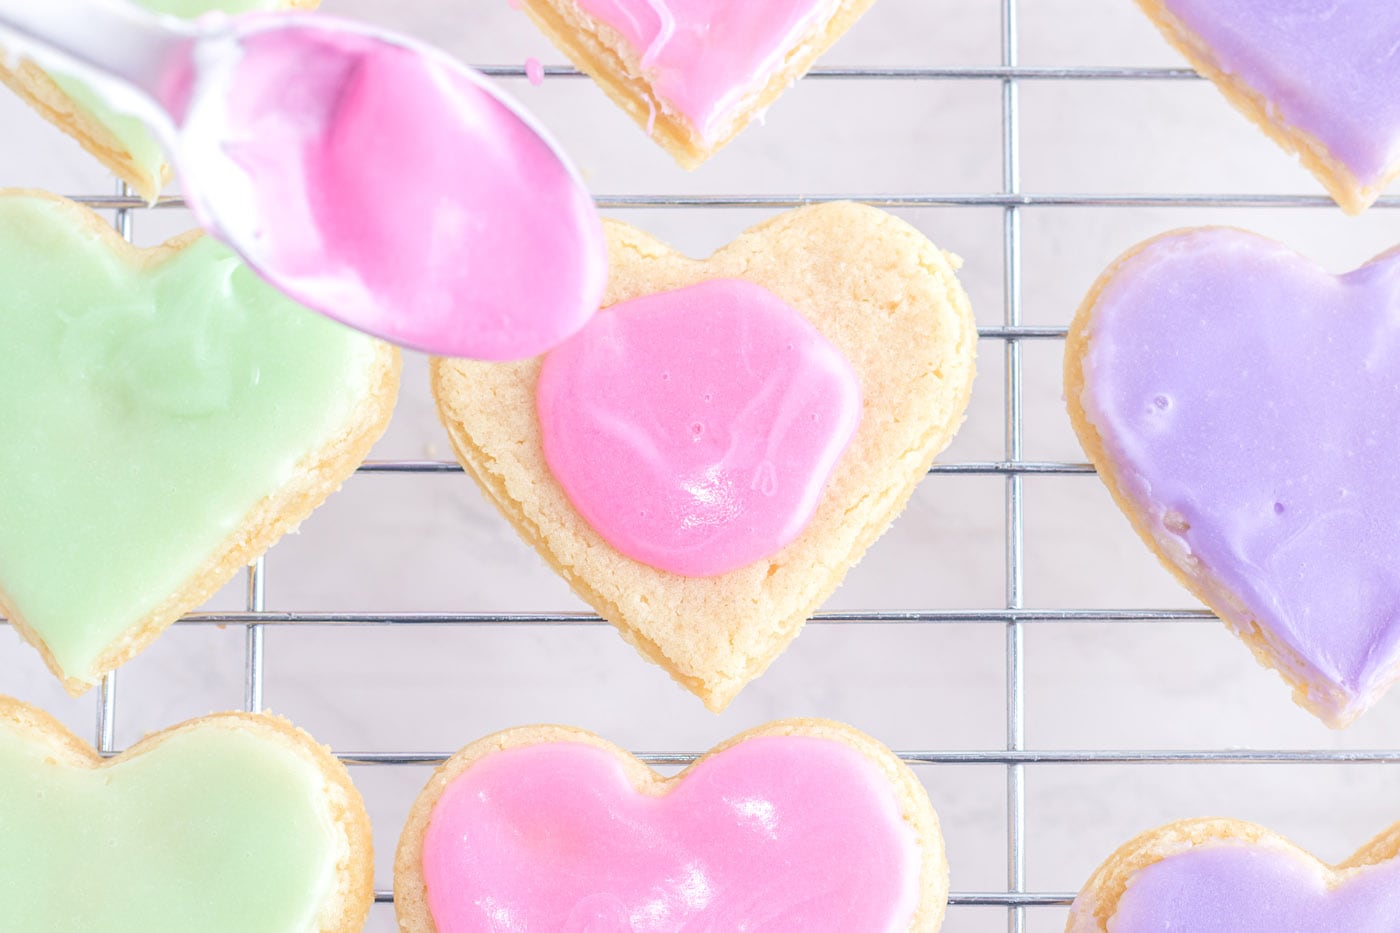 spoon dolloping pink frosting onto sugar cookie